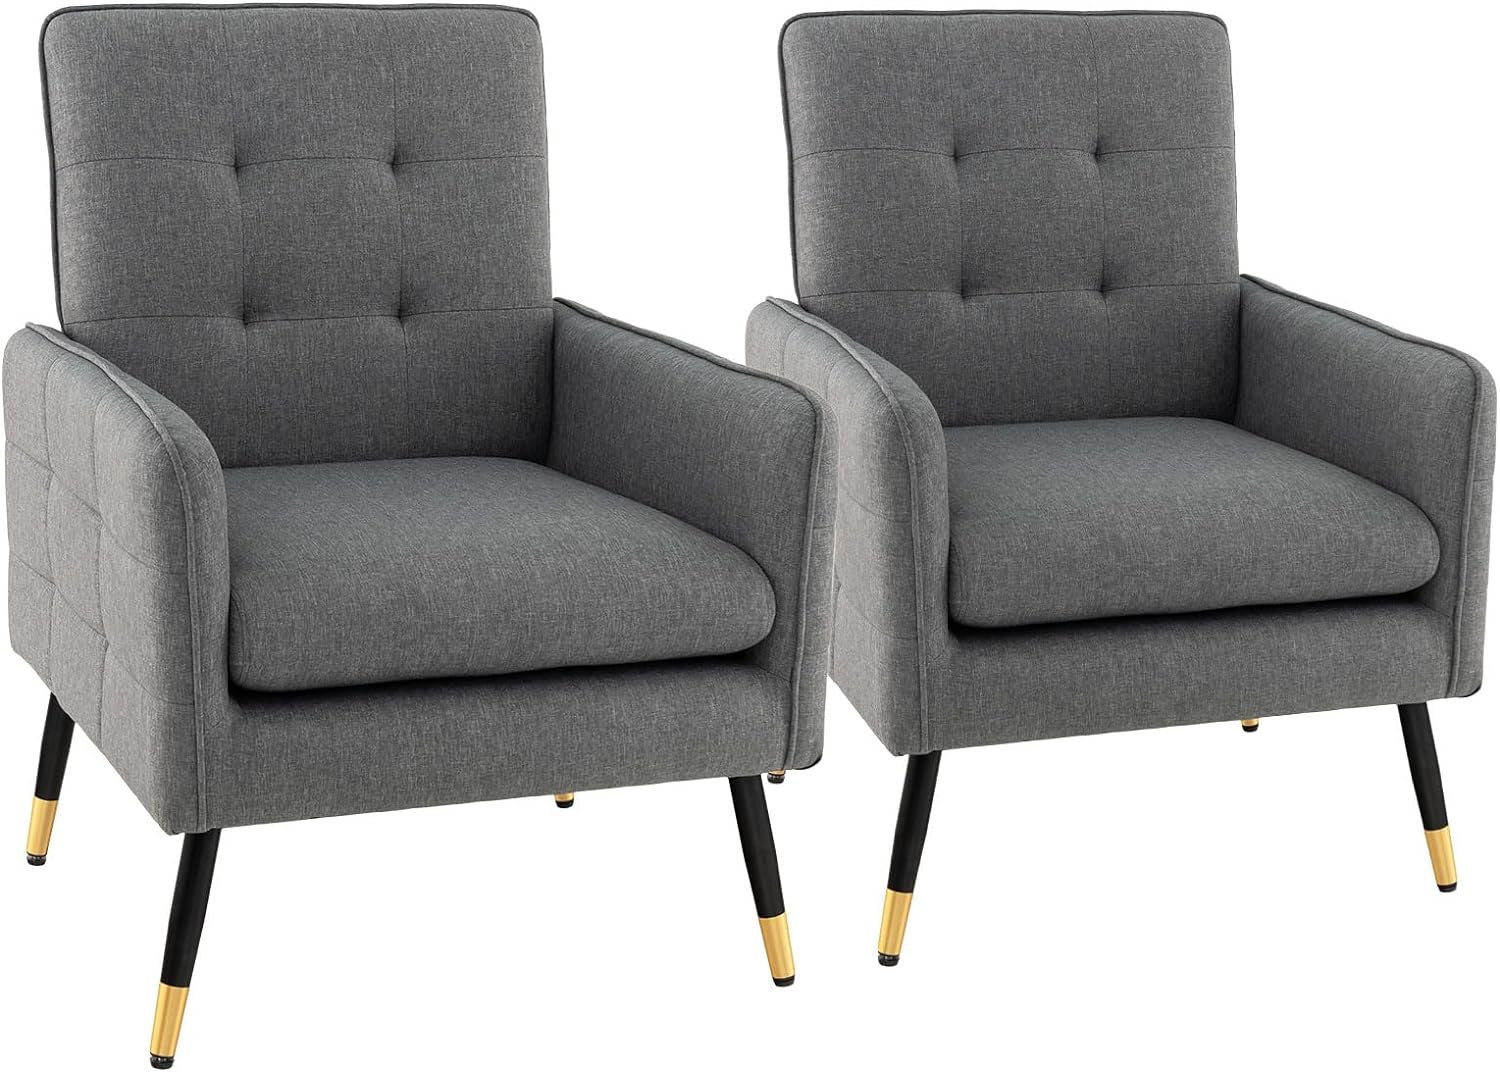 Giantex Modern Mid-Century Accent Chair - Upholstered Armchair with Tufted Back, Metal Legs